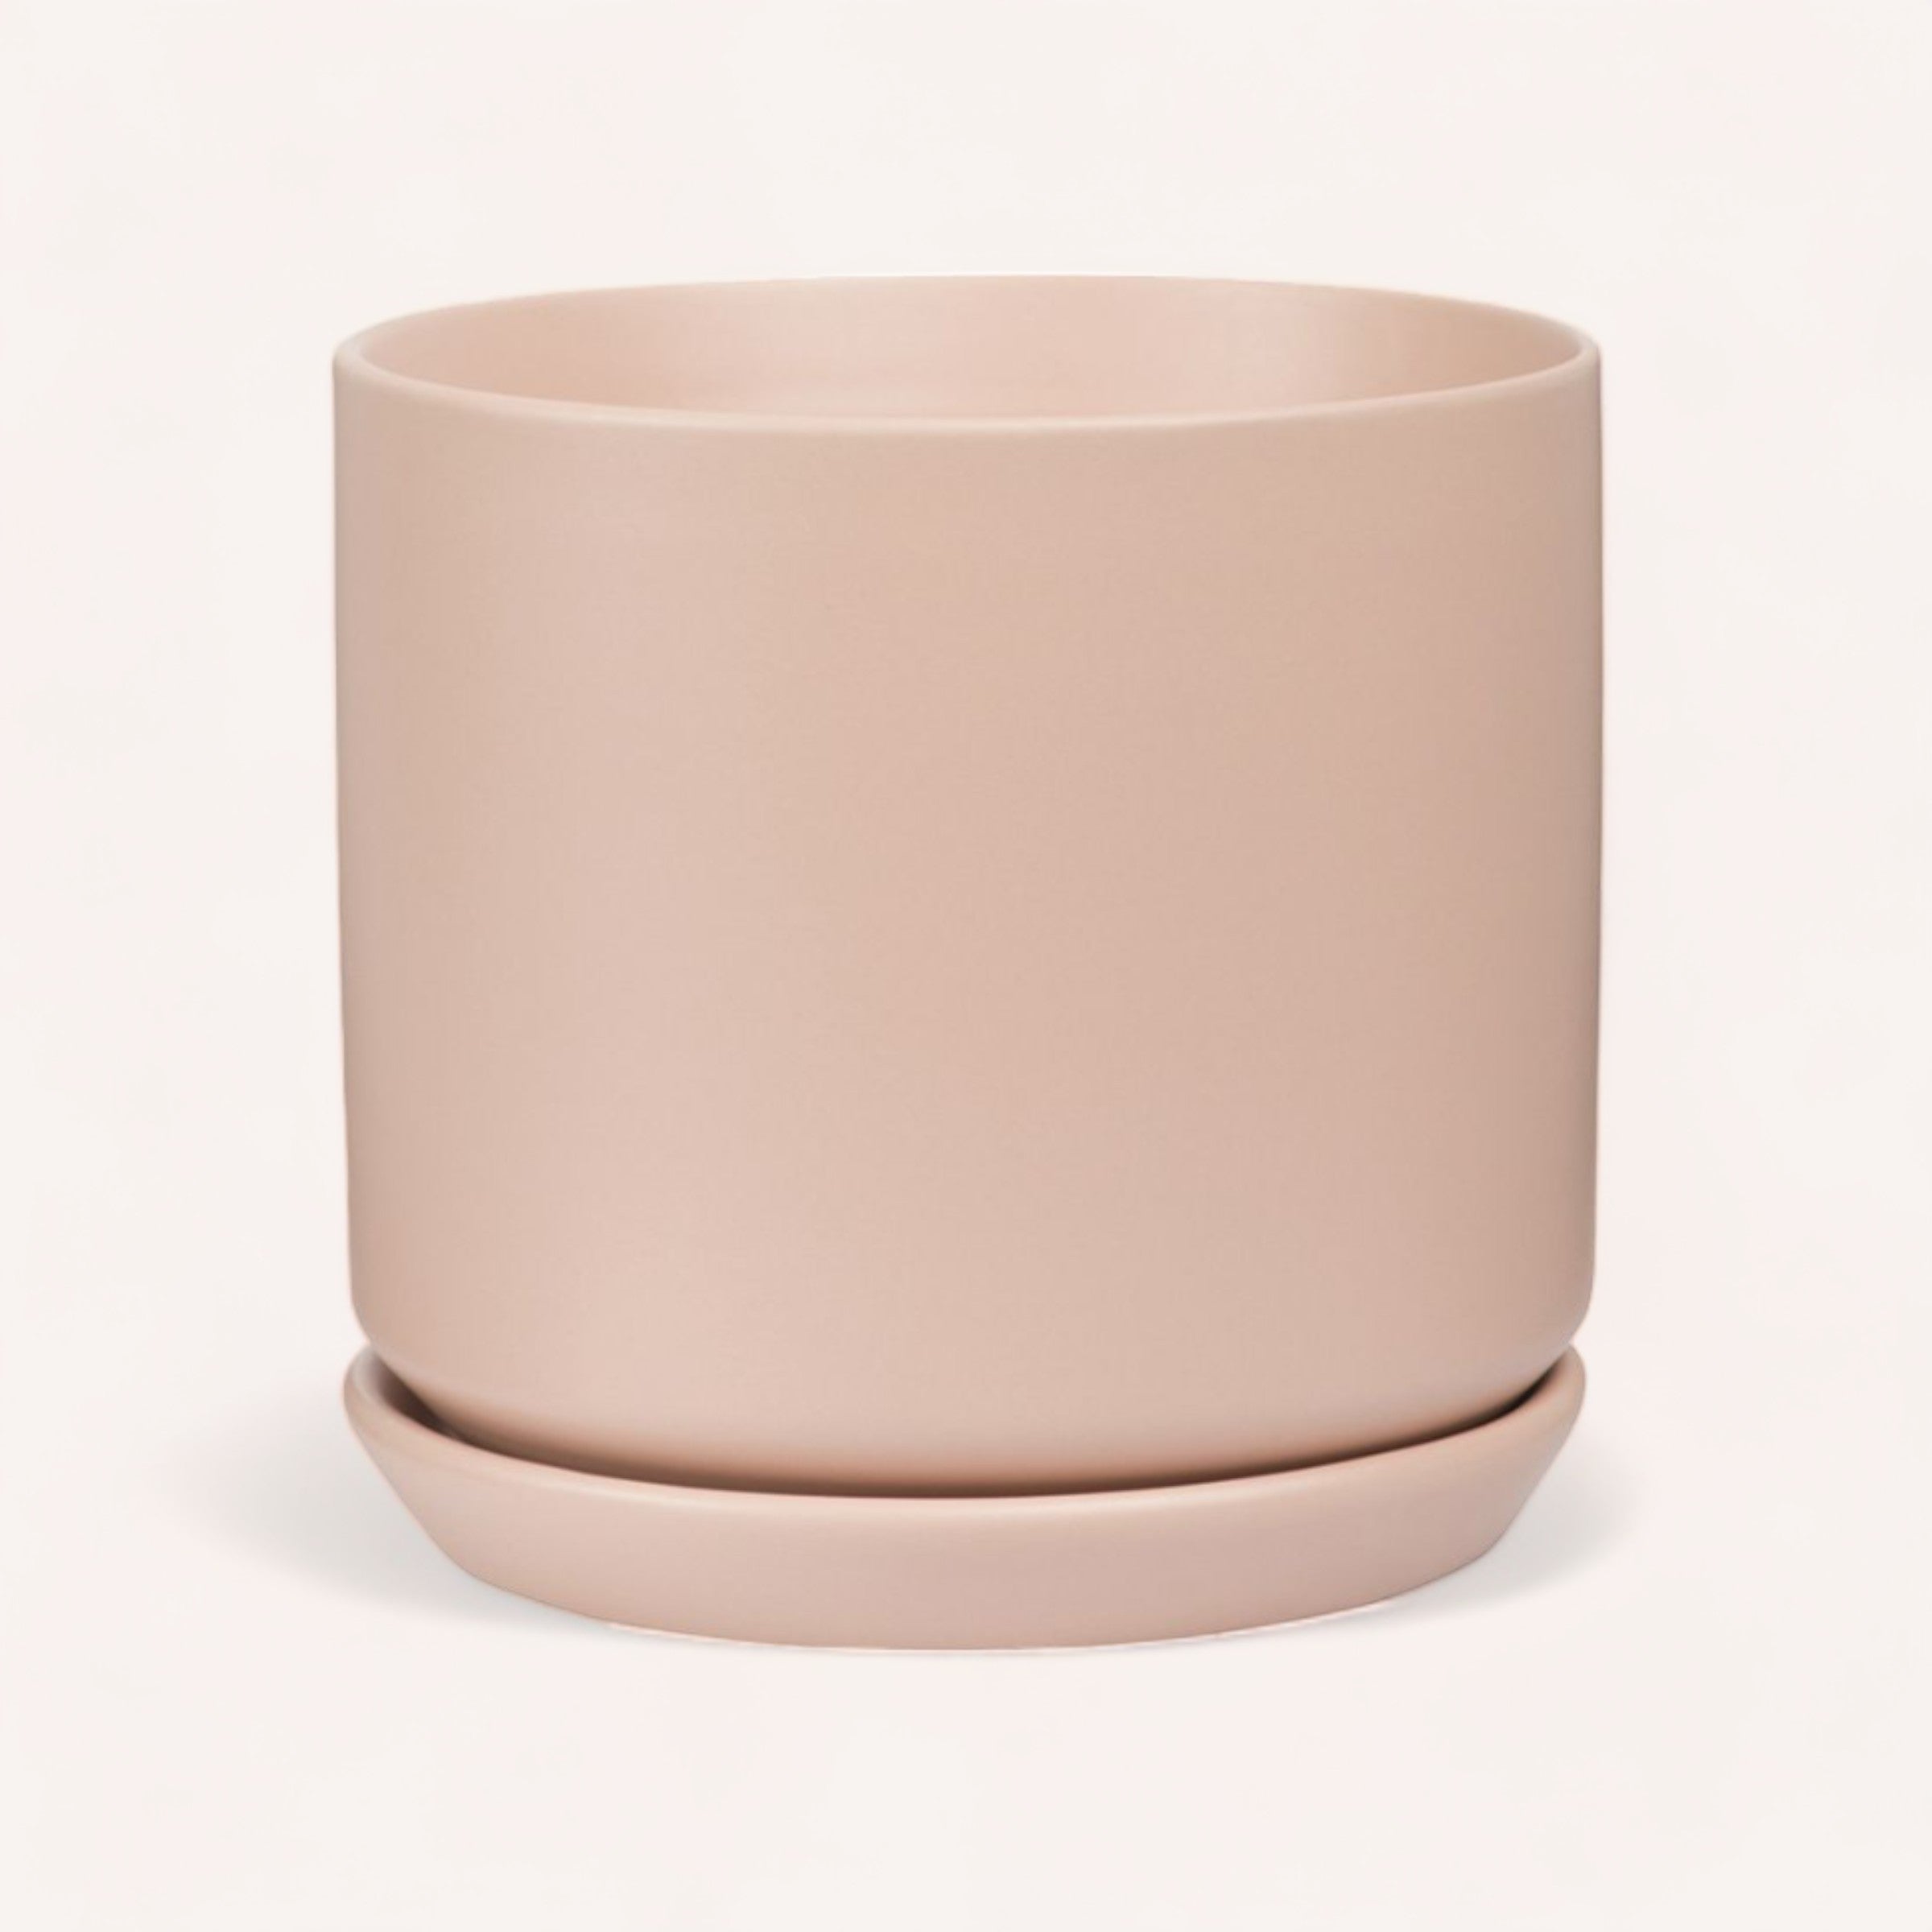 A simple, elegant peach-colored Oslo Planter by PottedNZ with a matching saucer, isolated on a clean, white background.